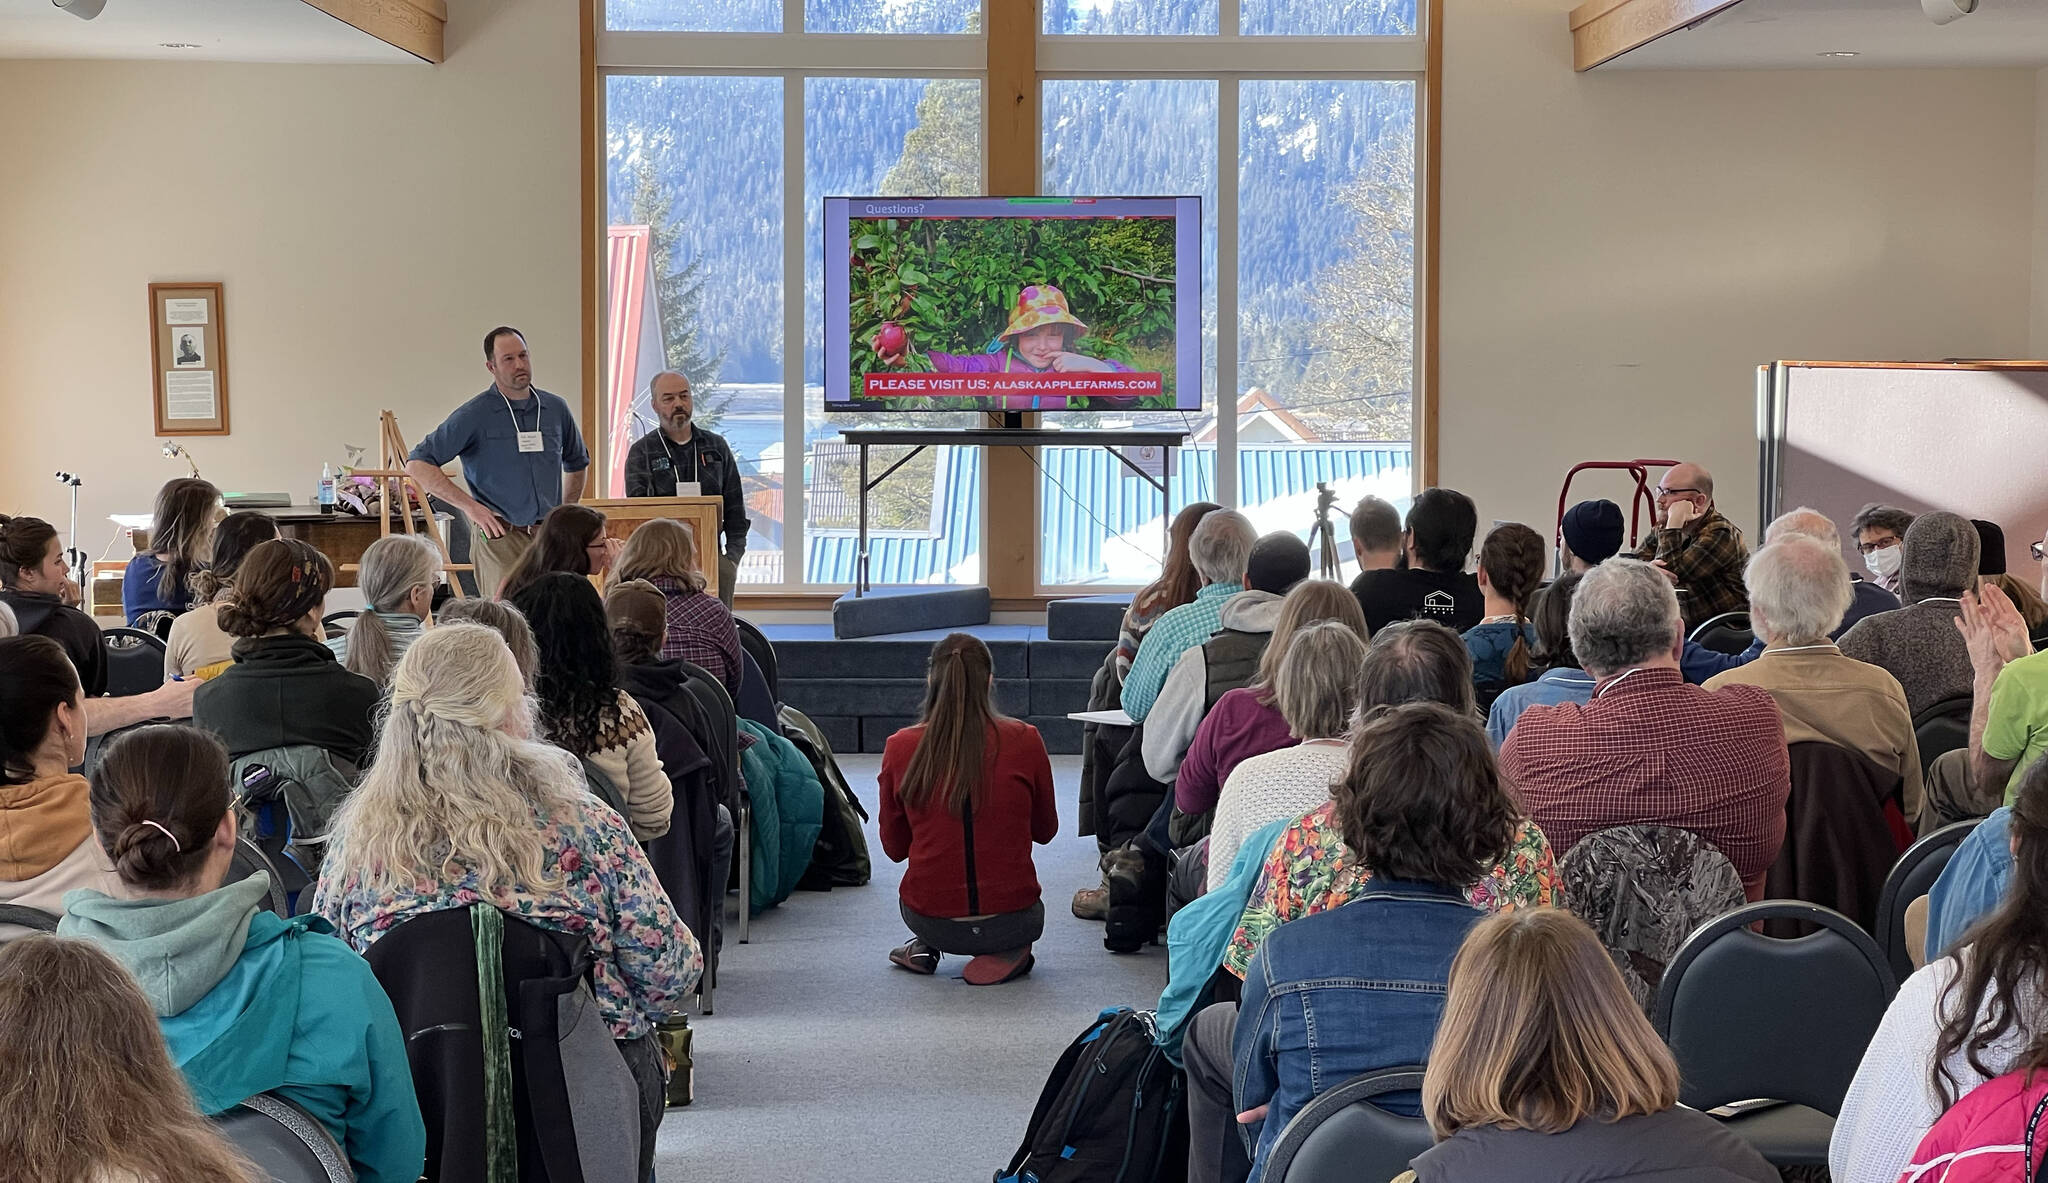 During three bright snowy days in Petersburg, over 100 farmers and growers from across the region gathered to share learnings for how to grow healthy, delicious, and nutritious foods in Southeast Alaska for the third Southeast Alaska Farmers Summit. The next summit will be held in 2025. (Tripp J Crouse / Spruce Root)